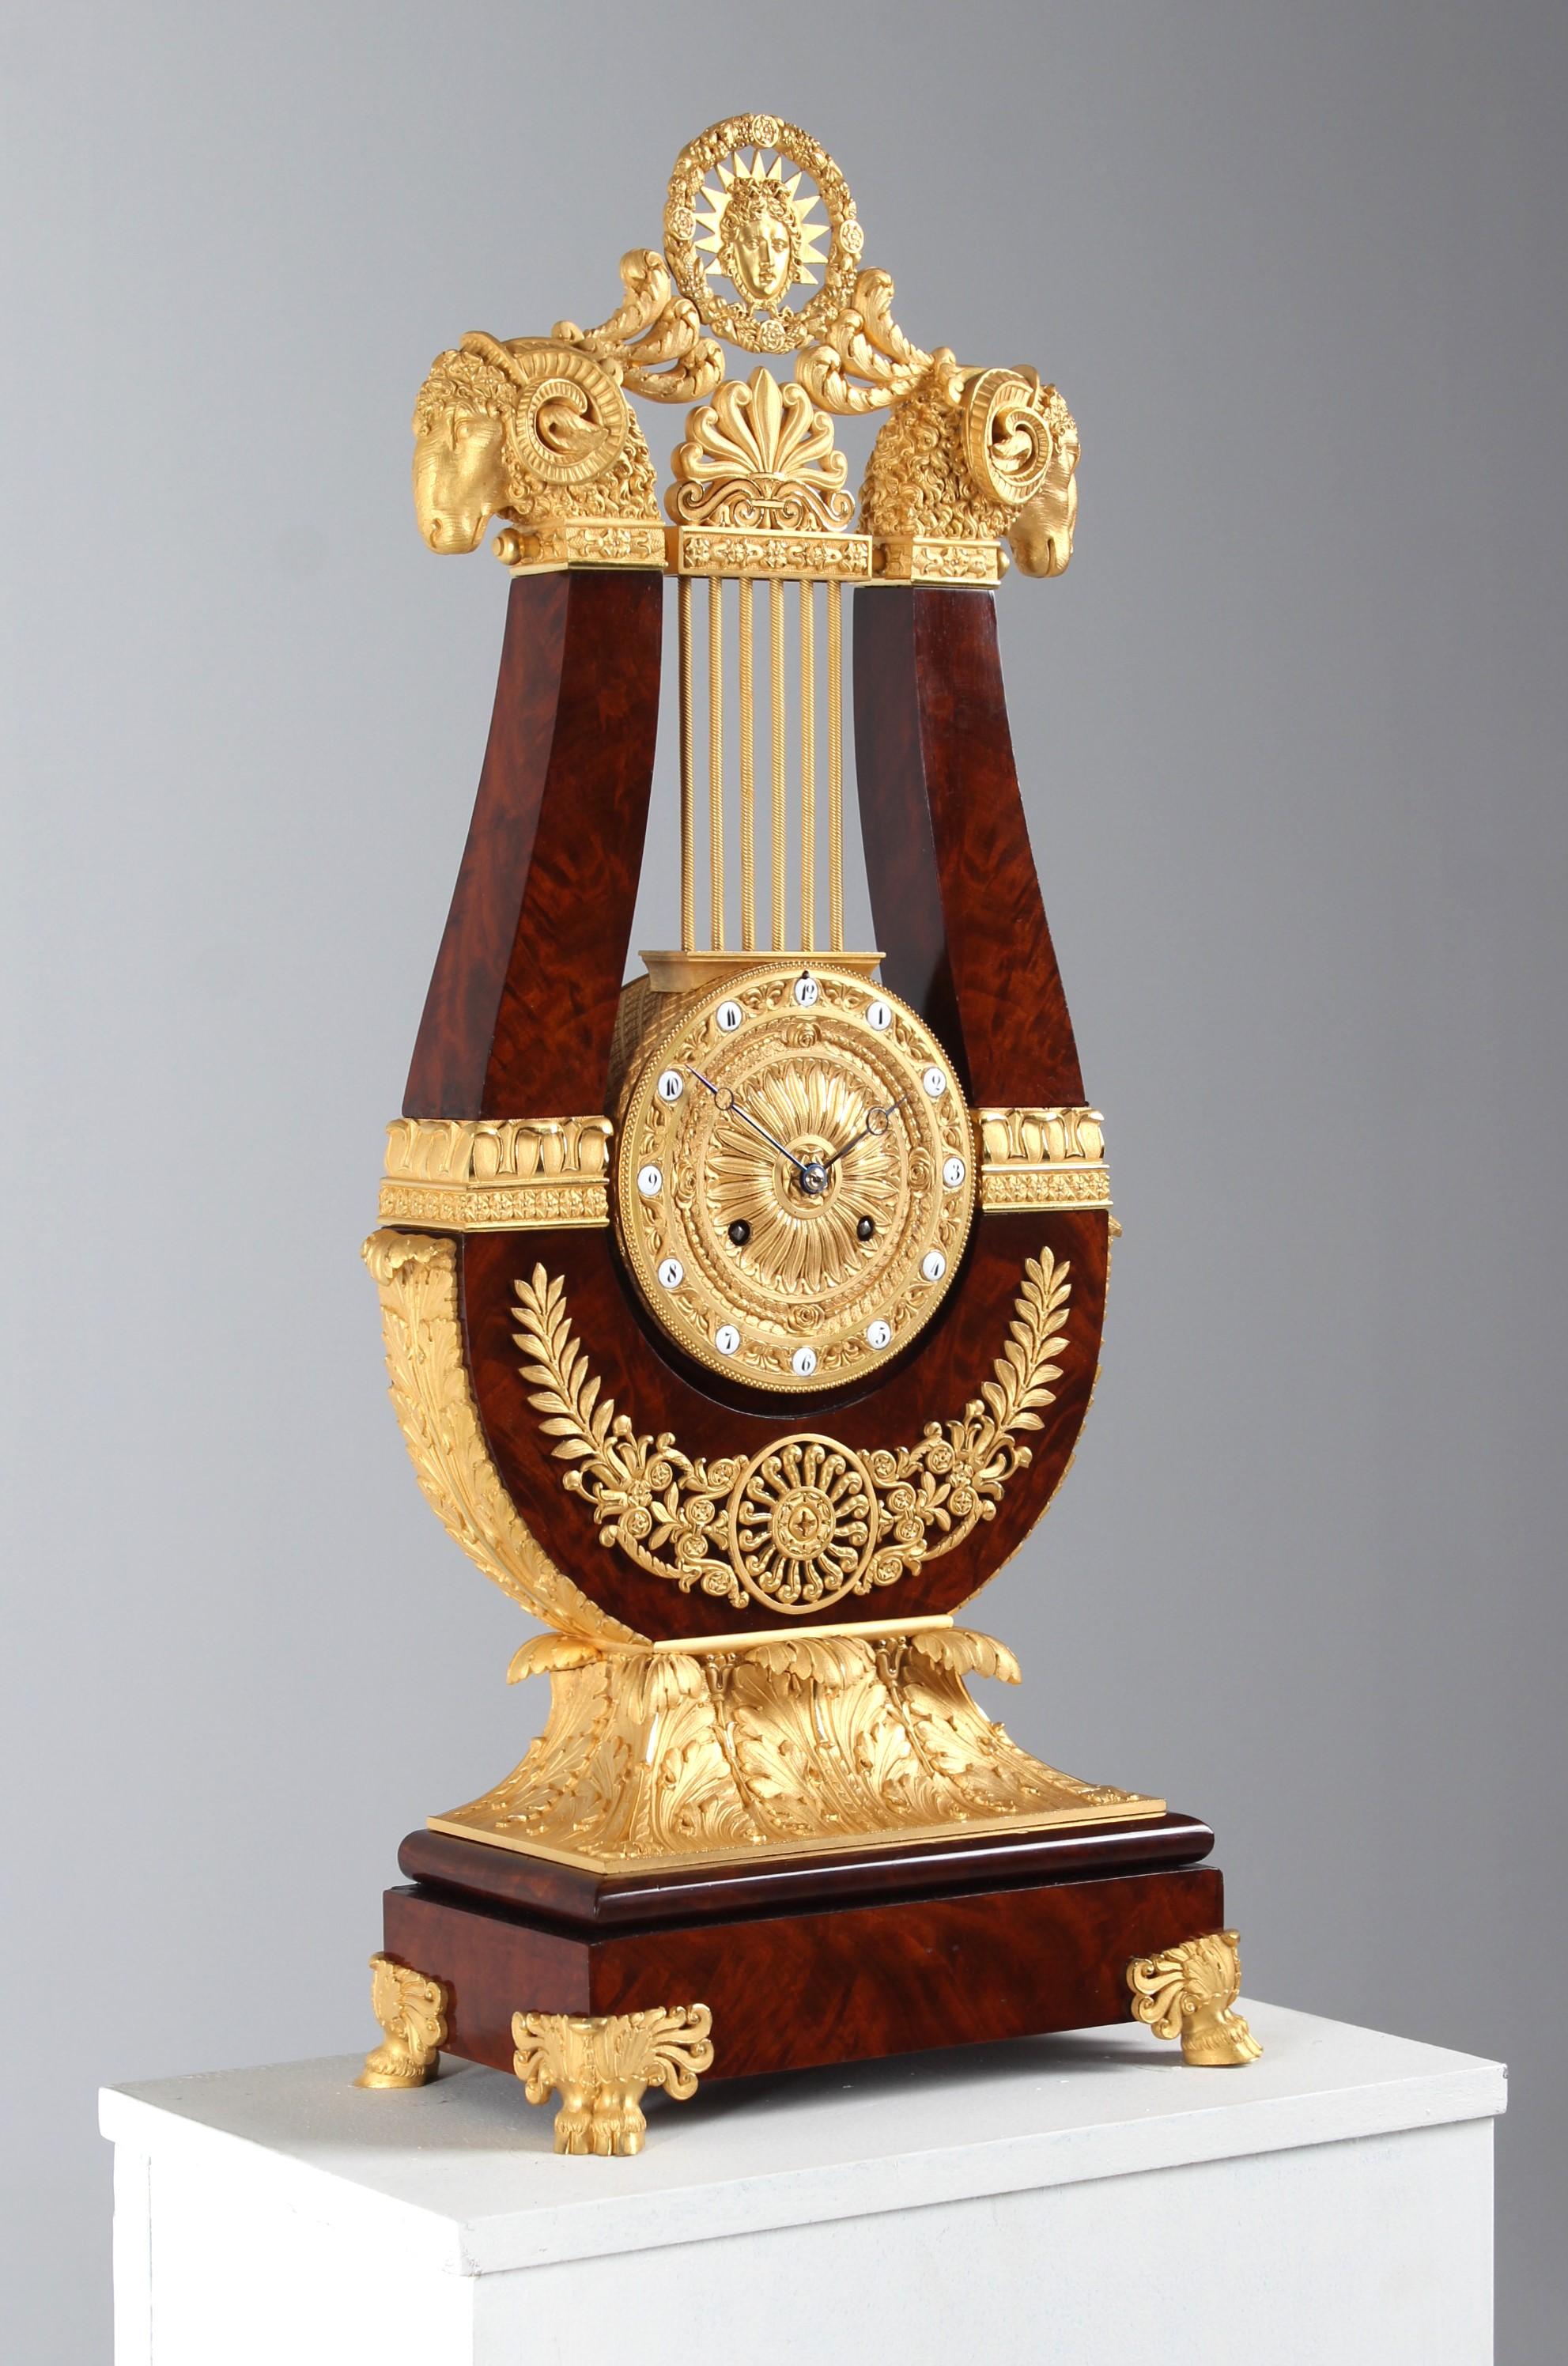 Large Lyra Pendule

Paris
circa 1820

Dimensions: H x W x D: 64 x 28 x 15 cm

Description:
The base stands on feet designed as ram's hooves. The lyre, symbolising Apollo, the god of light and music, is held up by acanthus leaves with numerous bronze